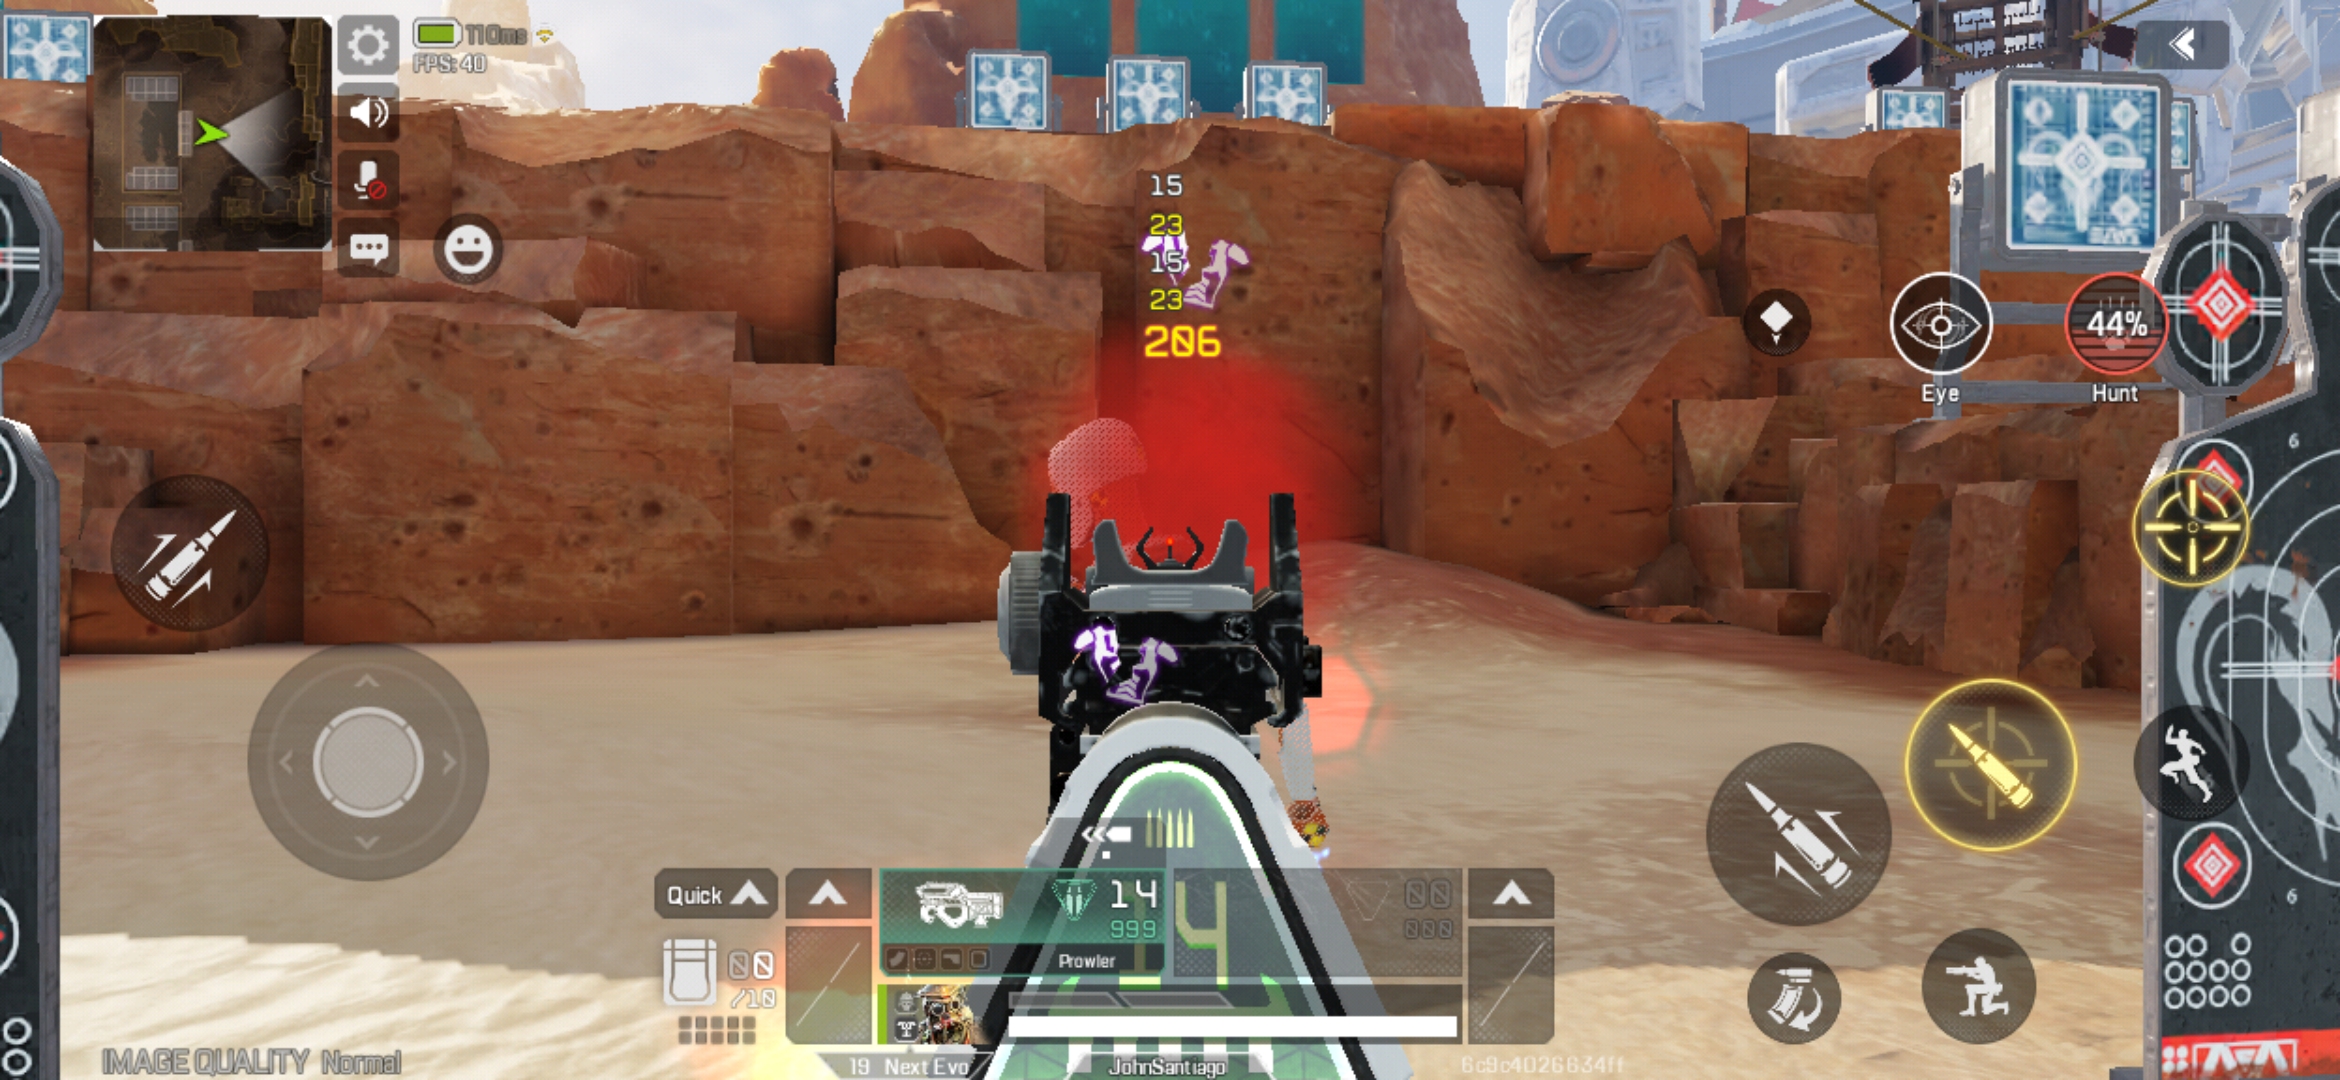 Apex Legends Mobile: How to Connect and Use A Controller